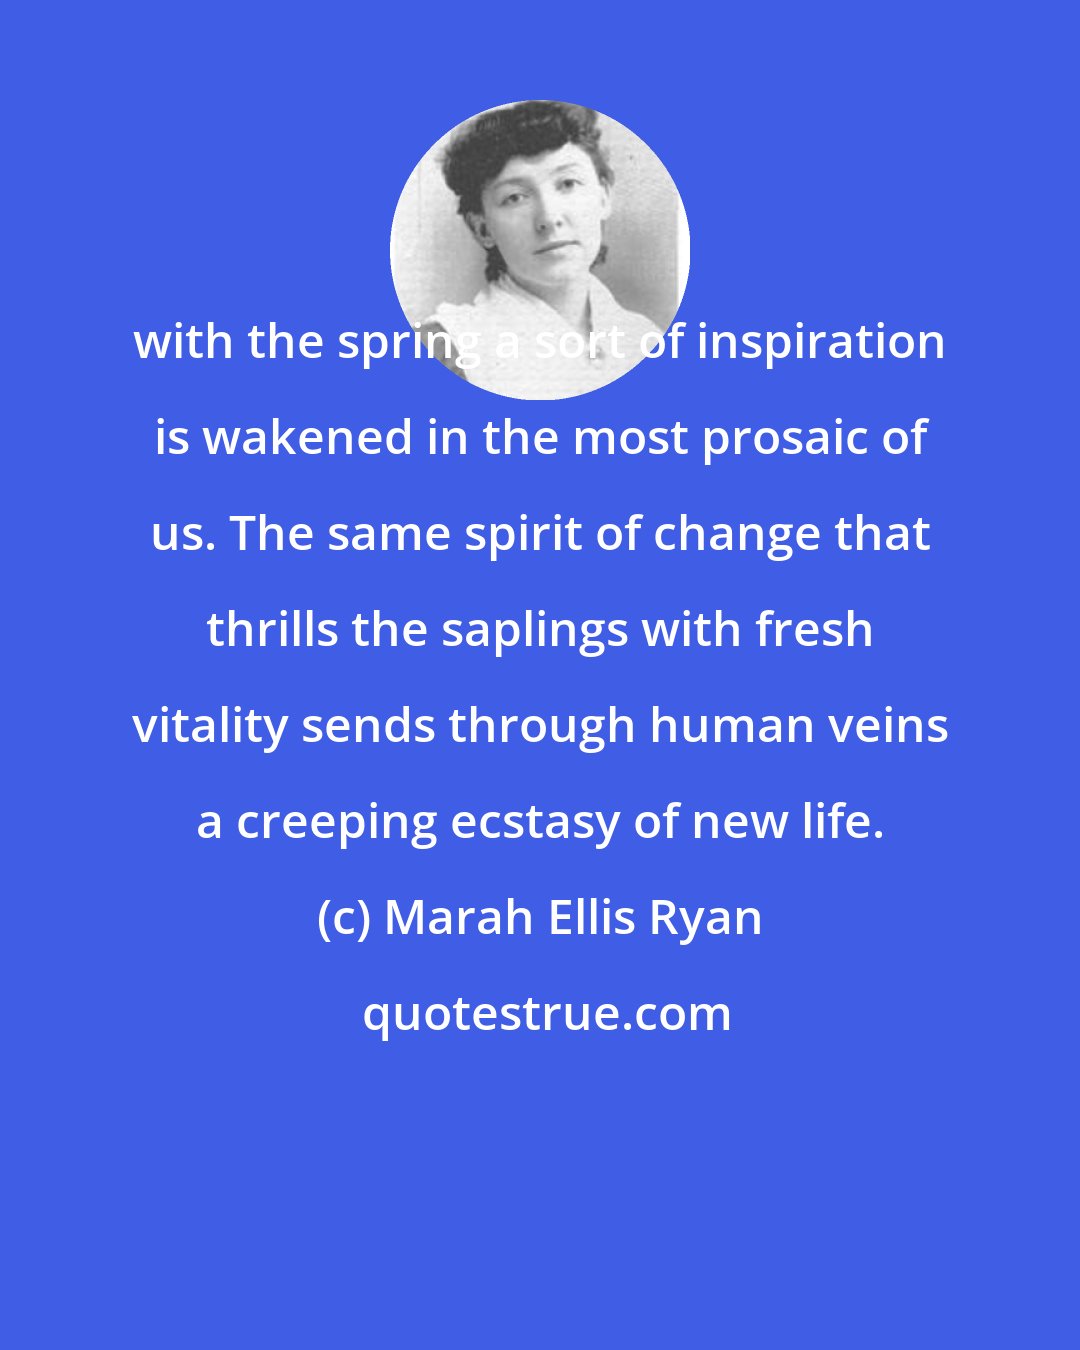 Marah Ellis Ryan: with the spring a sort of inspiration is wakened in the most prosaic of us. The same spirit of change that thrills the saplings with fresh vitality sends through human veins a creeping ecstasy of new life.